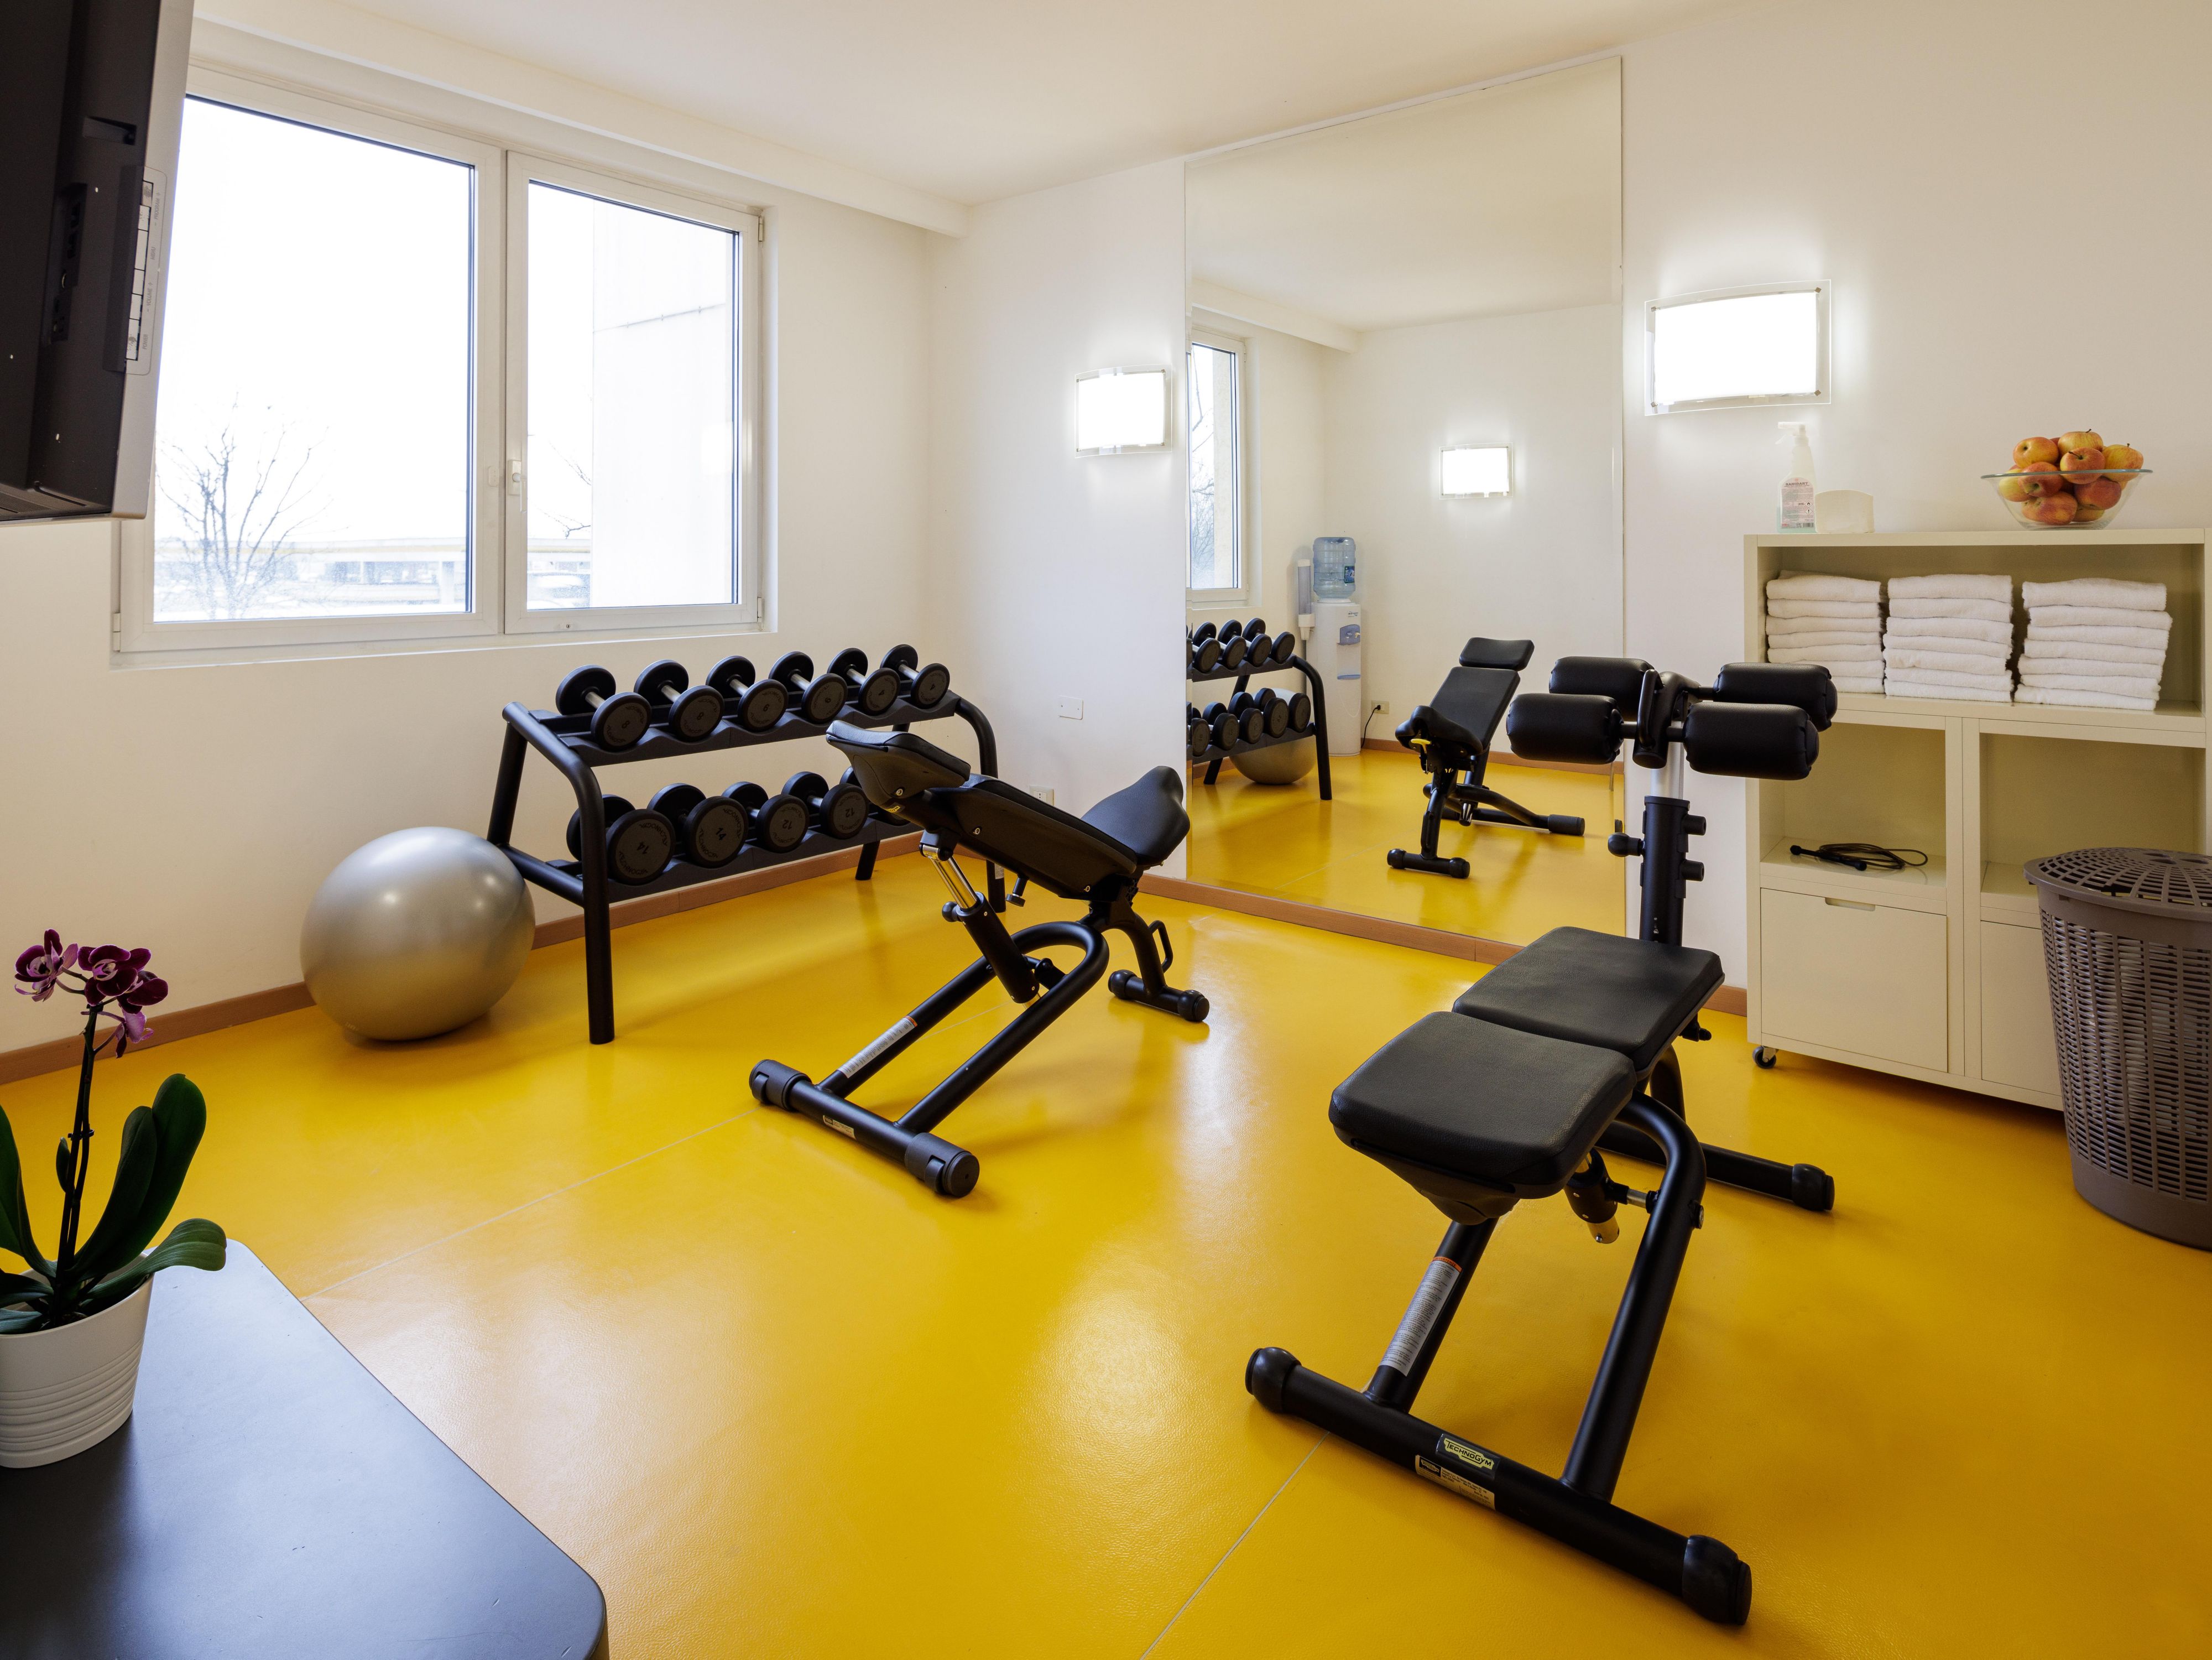 Recharge your batteries with a workout to let go of all the stress and tension. Take care of your mind and body even when you are on a business trip or holiday with our free fitness room equipped with Technogym machines!